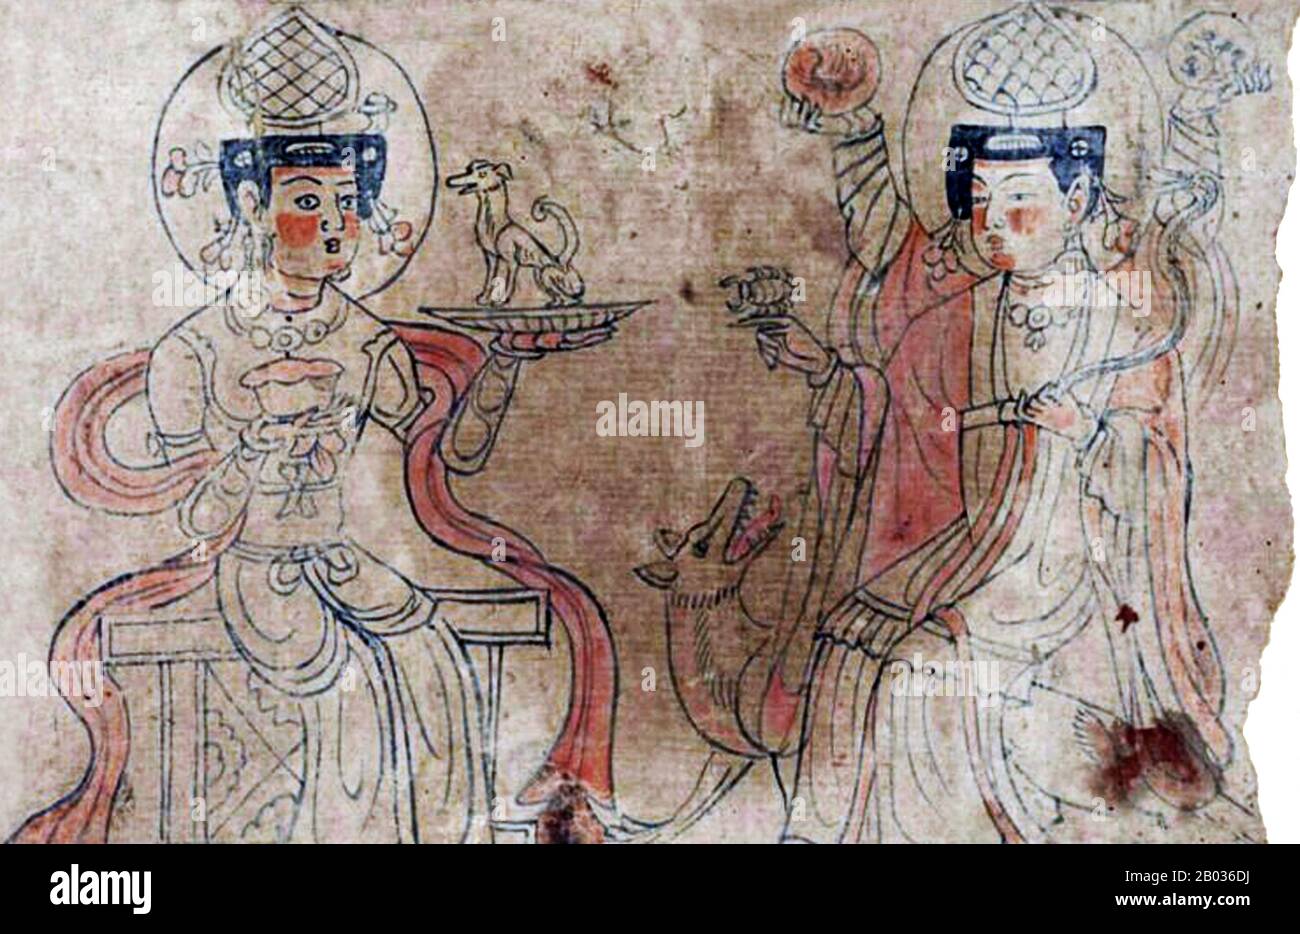 Manichaeism was the most important Gnostic religion. Central in the Manichaean teaching was dualism, that the world itself, and all creatures, were part of a battle between the good, represented by God, and the bad, the darkness, represented by a power driven by envy and lust.  Manichaeism spread over most of the known world of the 1st millennium CE, from Spain to China. But the religion disappeared from the West in 10th century, and from China in the 14th century. Today it is extinct. Stock Photo